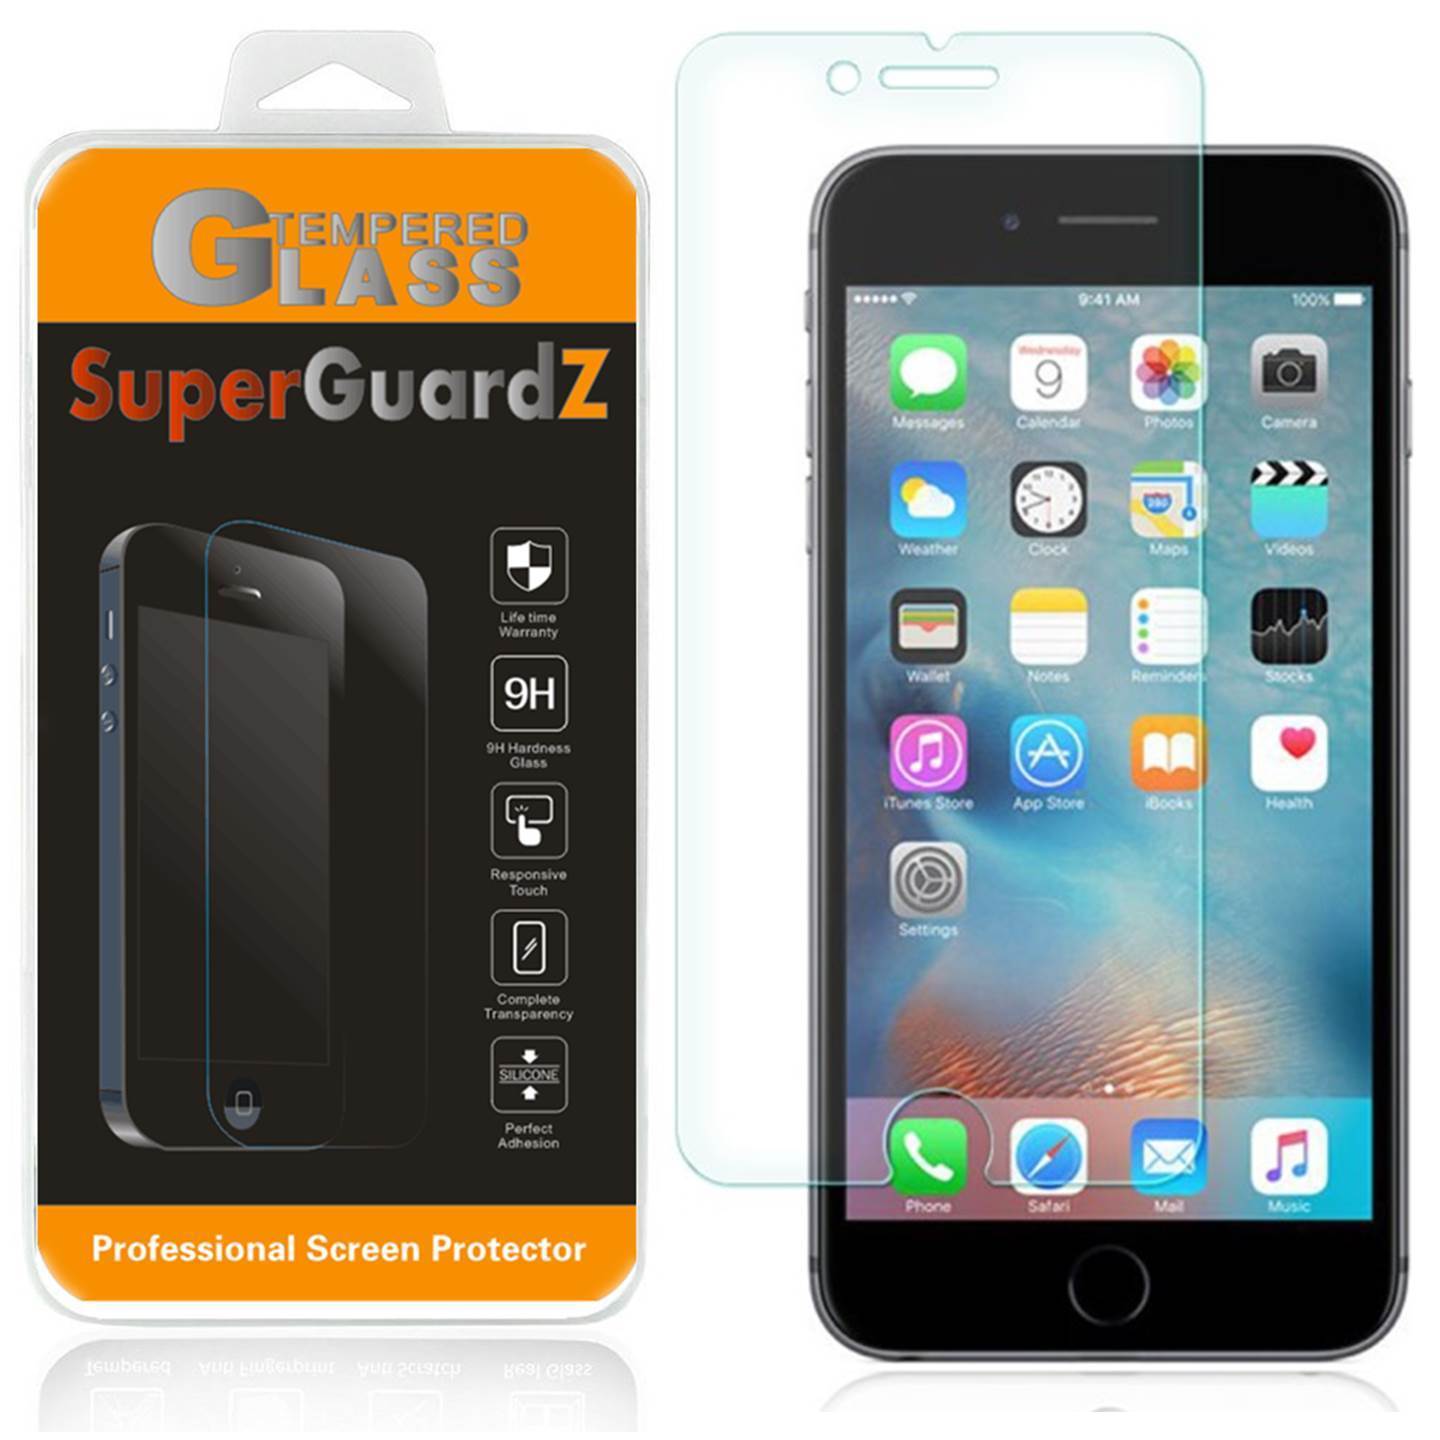 [3-Pack] For iPhone 7S Plus 5.5" / iPhone 7 Plus 5.5" - SuperGuardZ Tempered Glass Screen Protector, 9H, Anti-Scratch, Anti-Bubble, Anti-Fingerprint - image 1 of 4